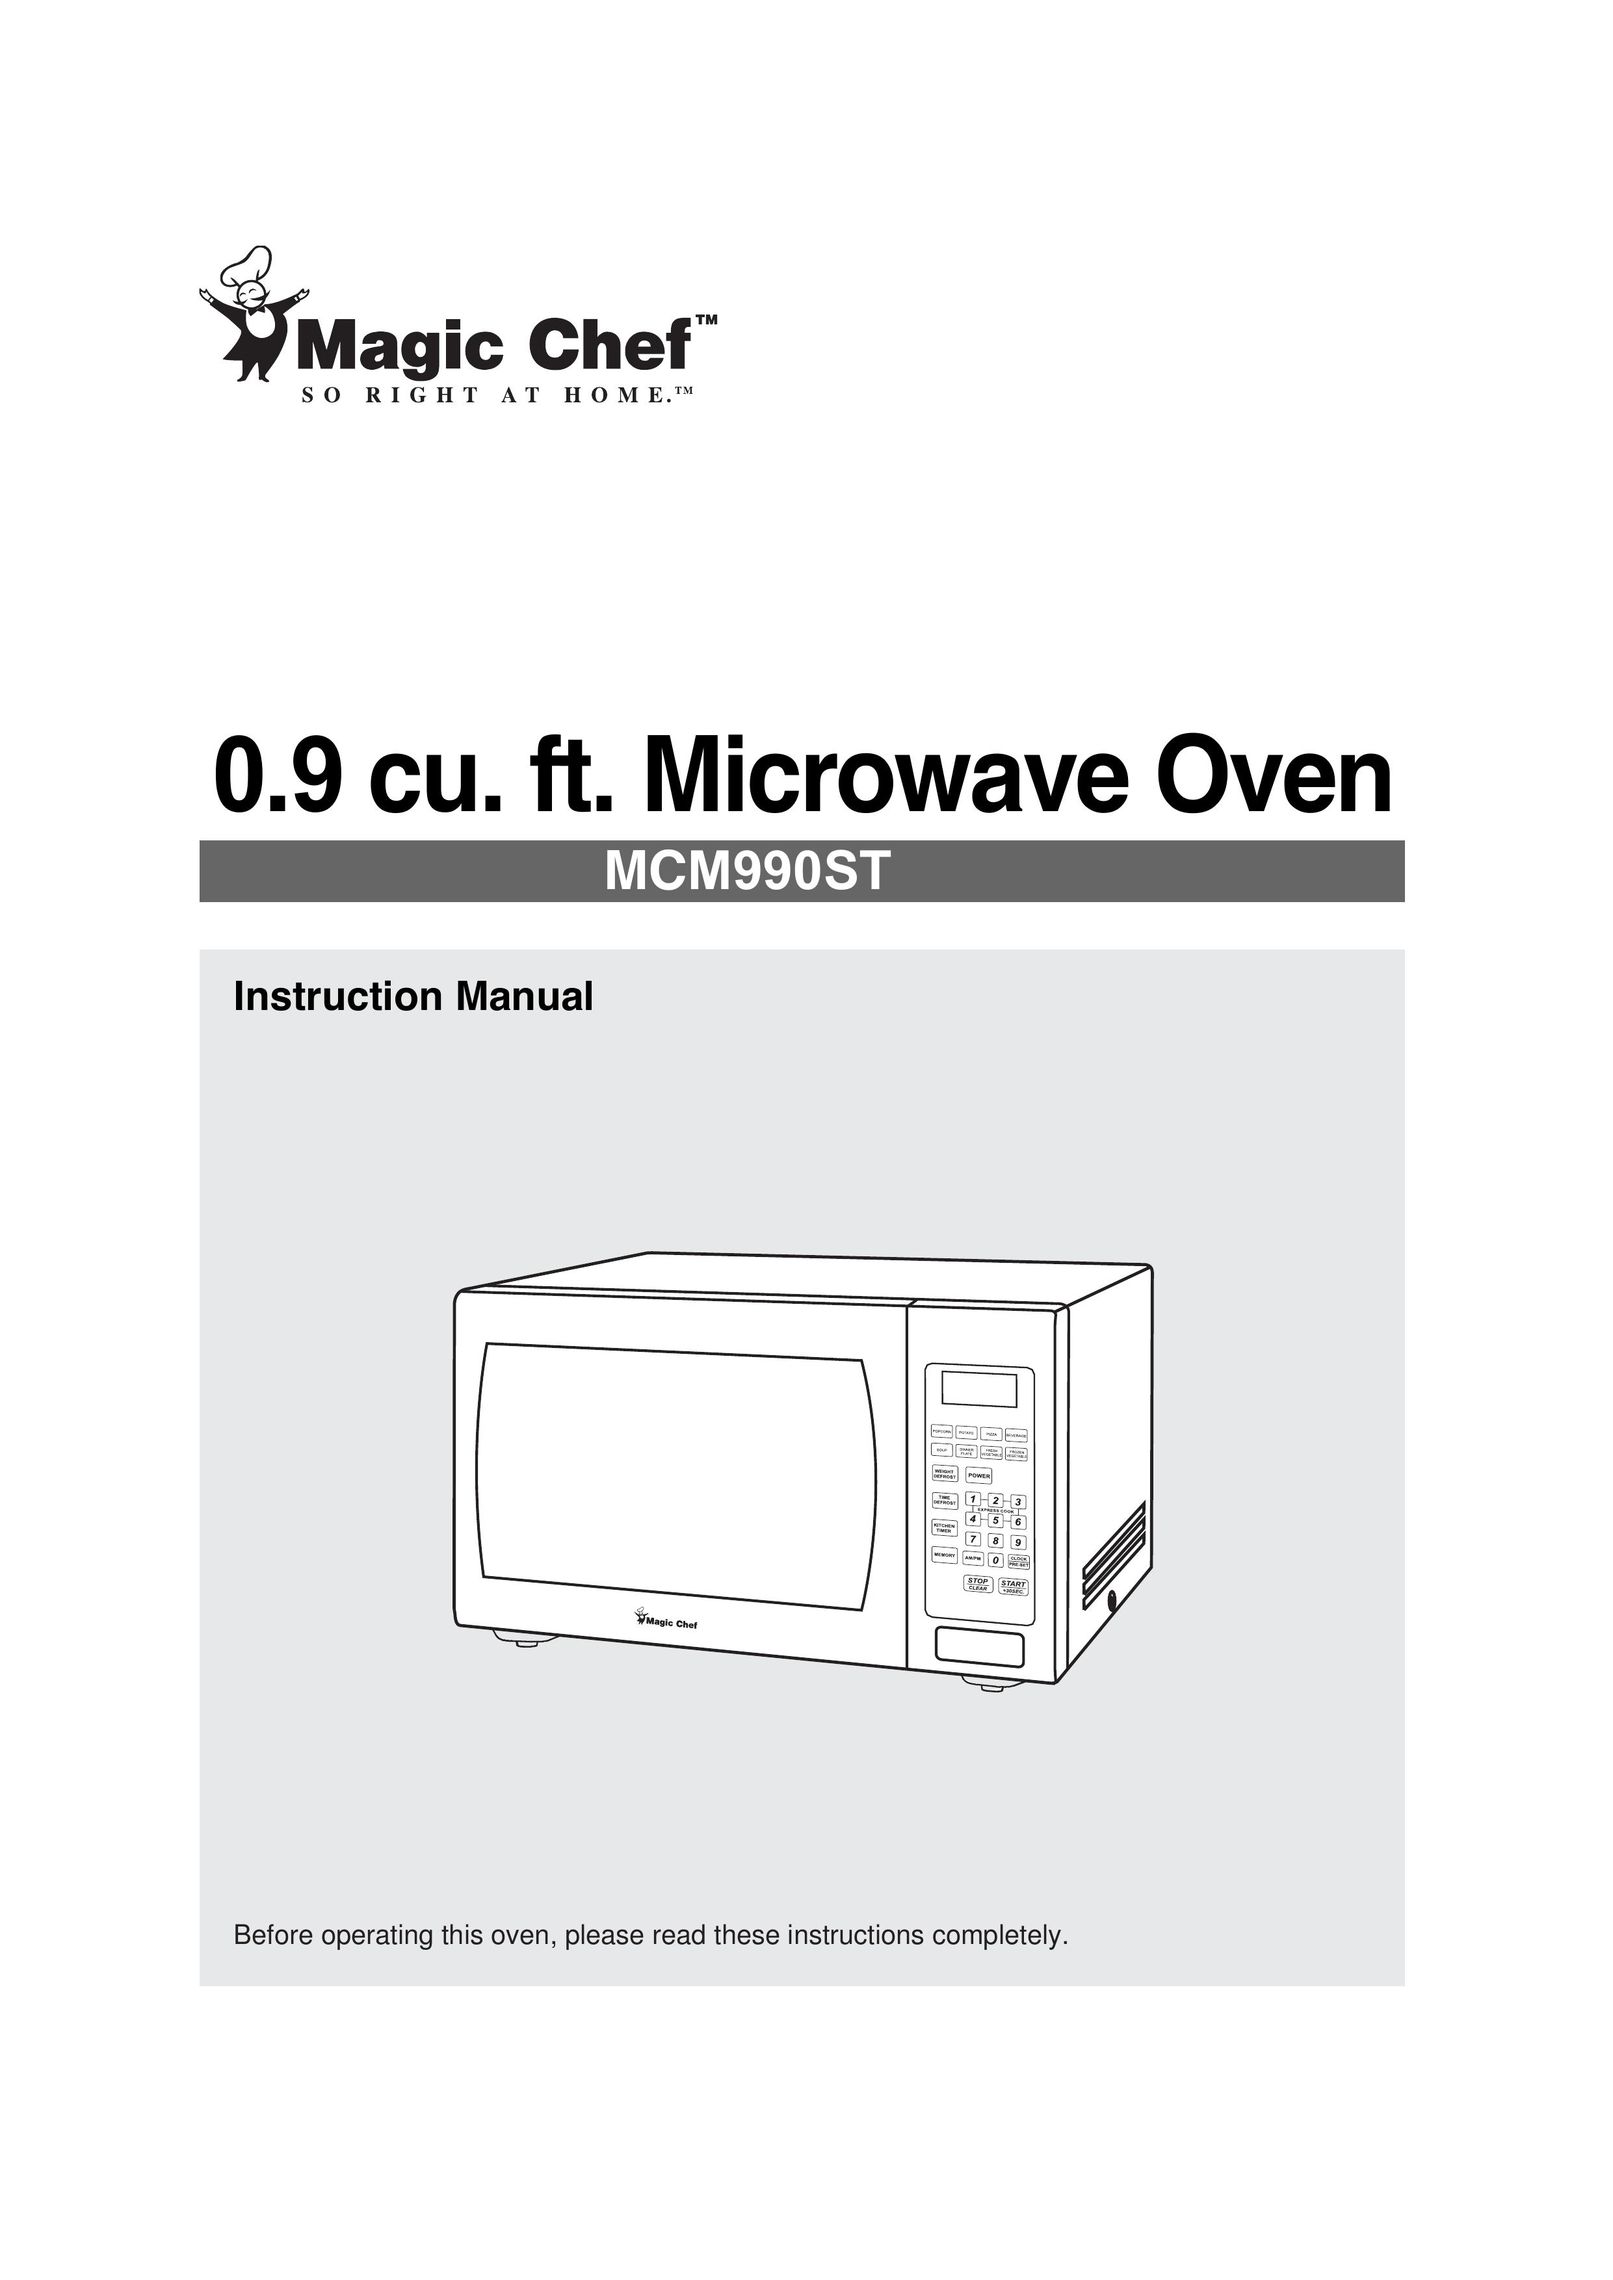 Magic Chef MCM990ST Microwave Oven User Manual